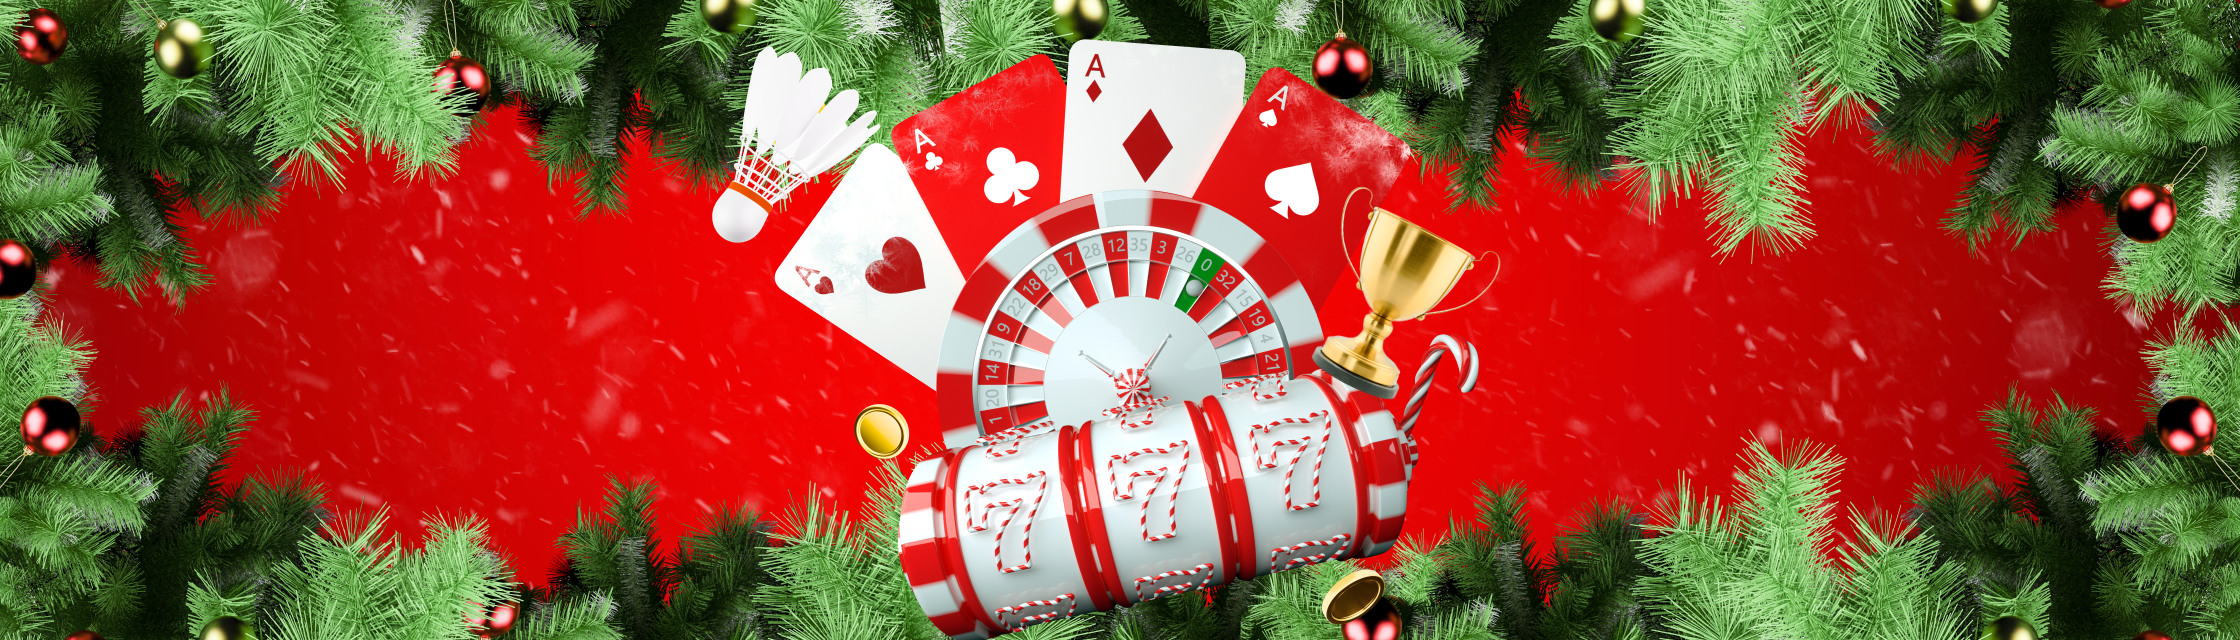 Promo banner of the Parimatch with slot, roulette, cards in the center and сhristmas tree branches